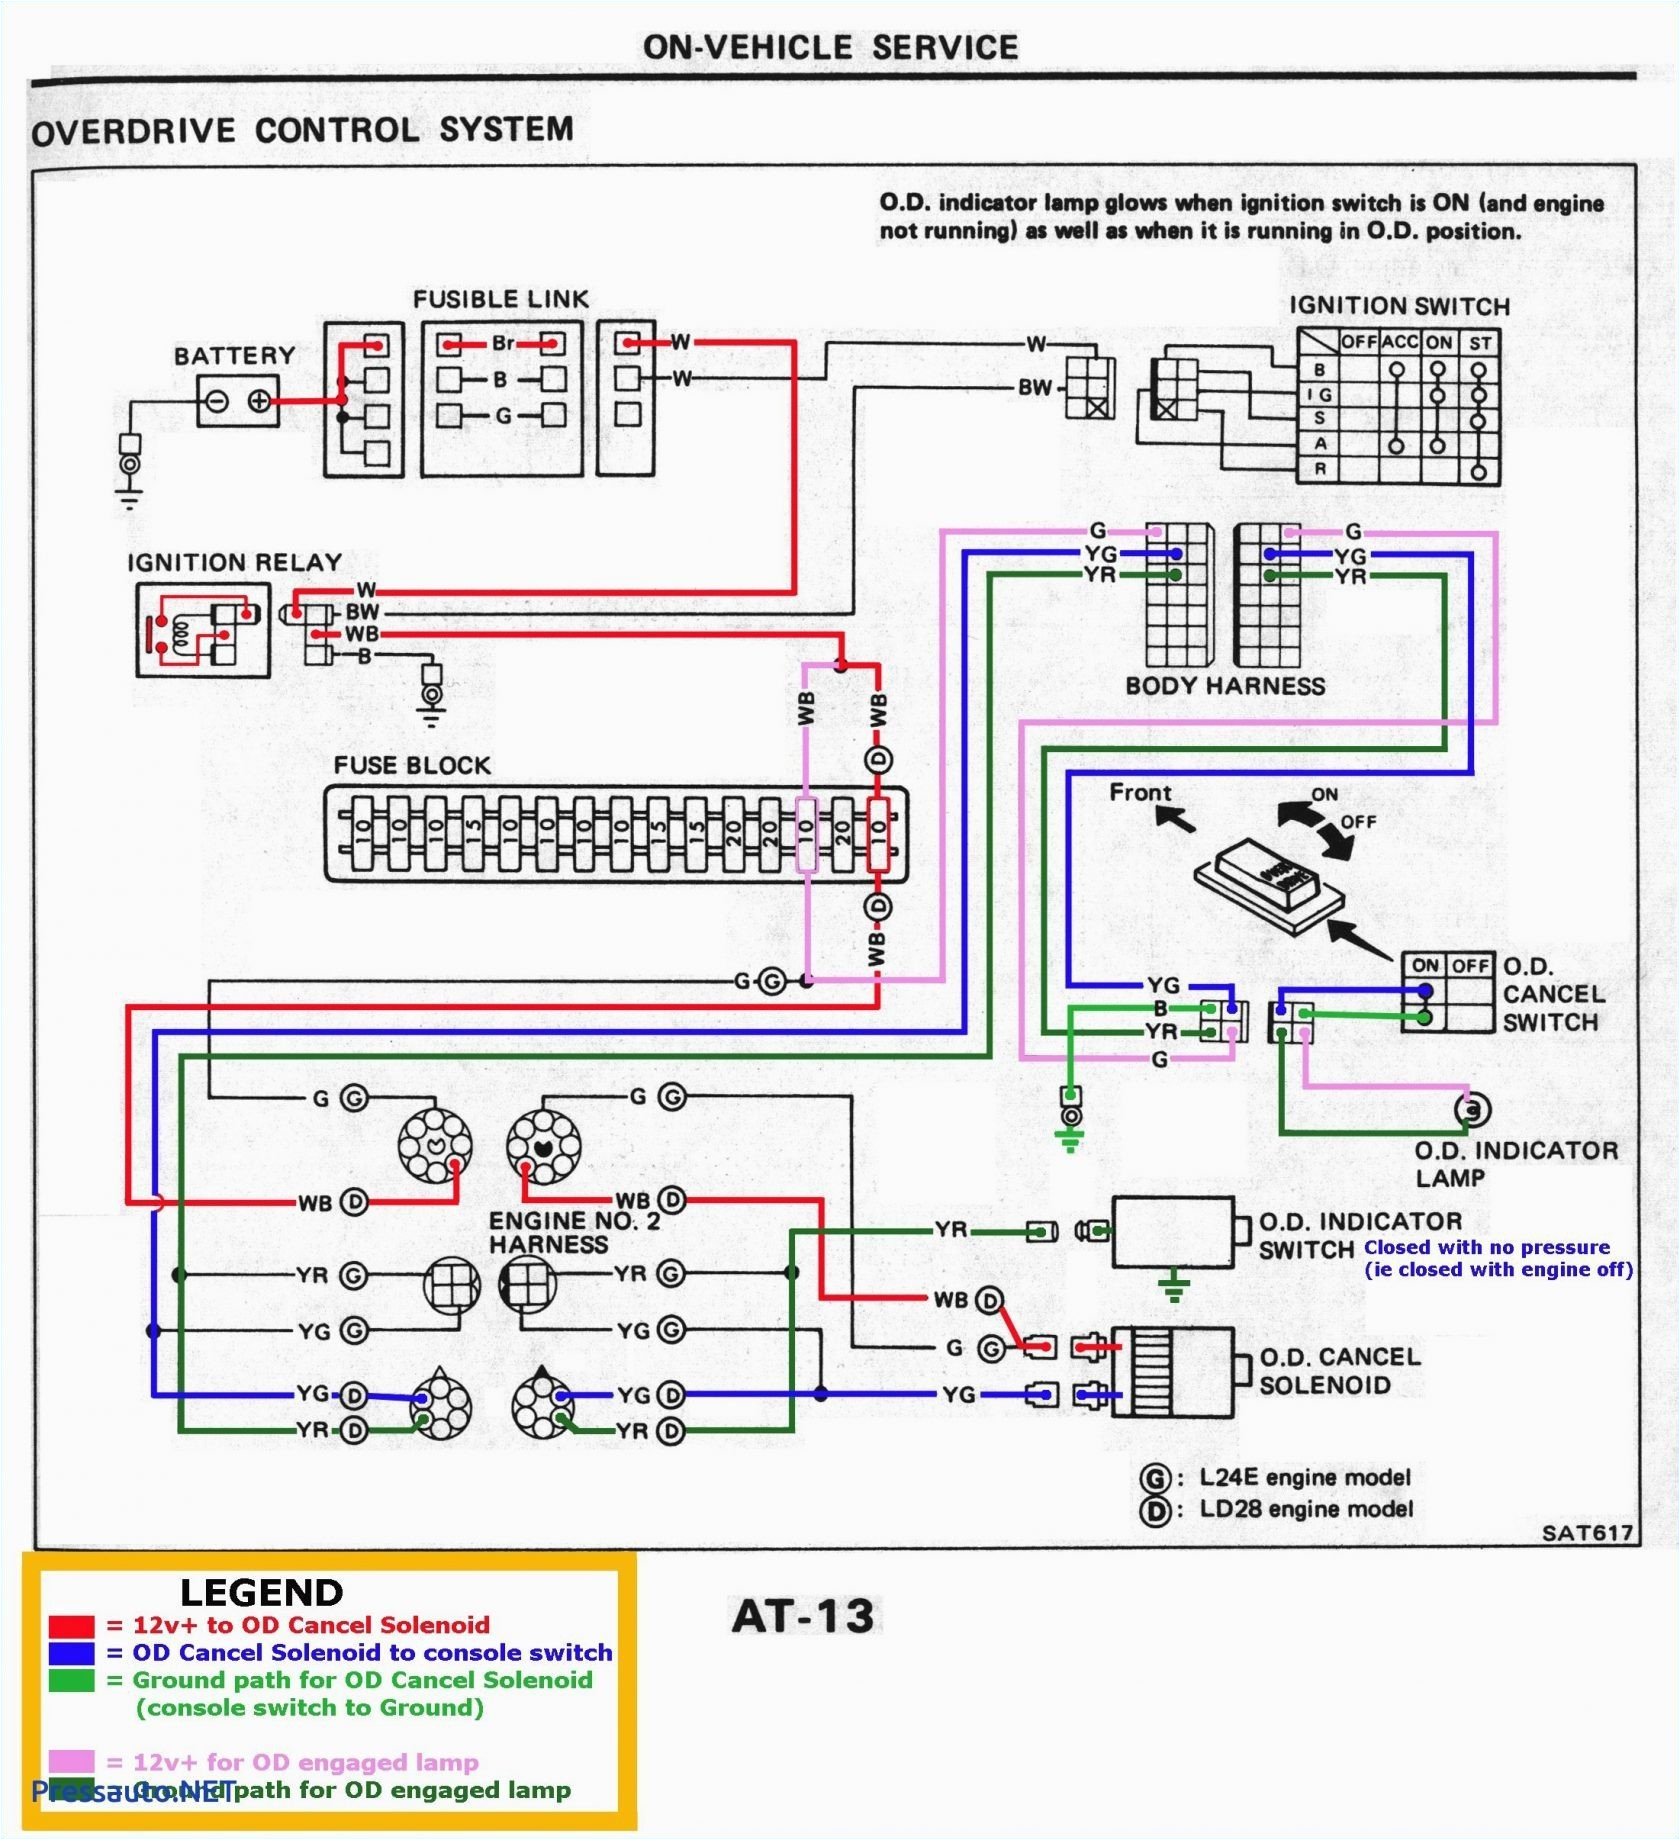 nissan altima stereo wiring wiring diagram centre 2006 nissan frontier stereo wiring harness 2006 nissan an stereo wiring harness